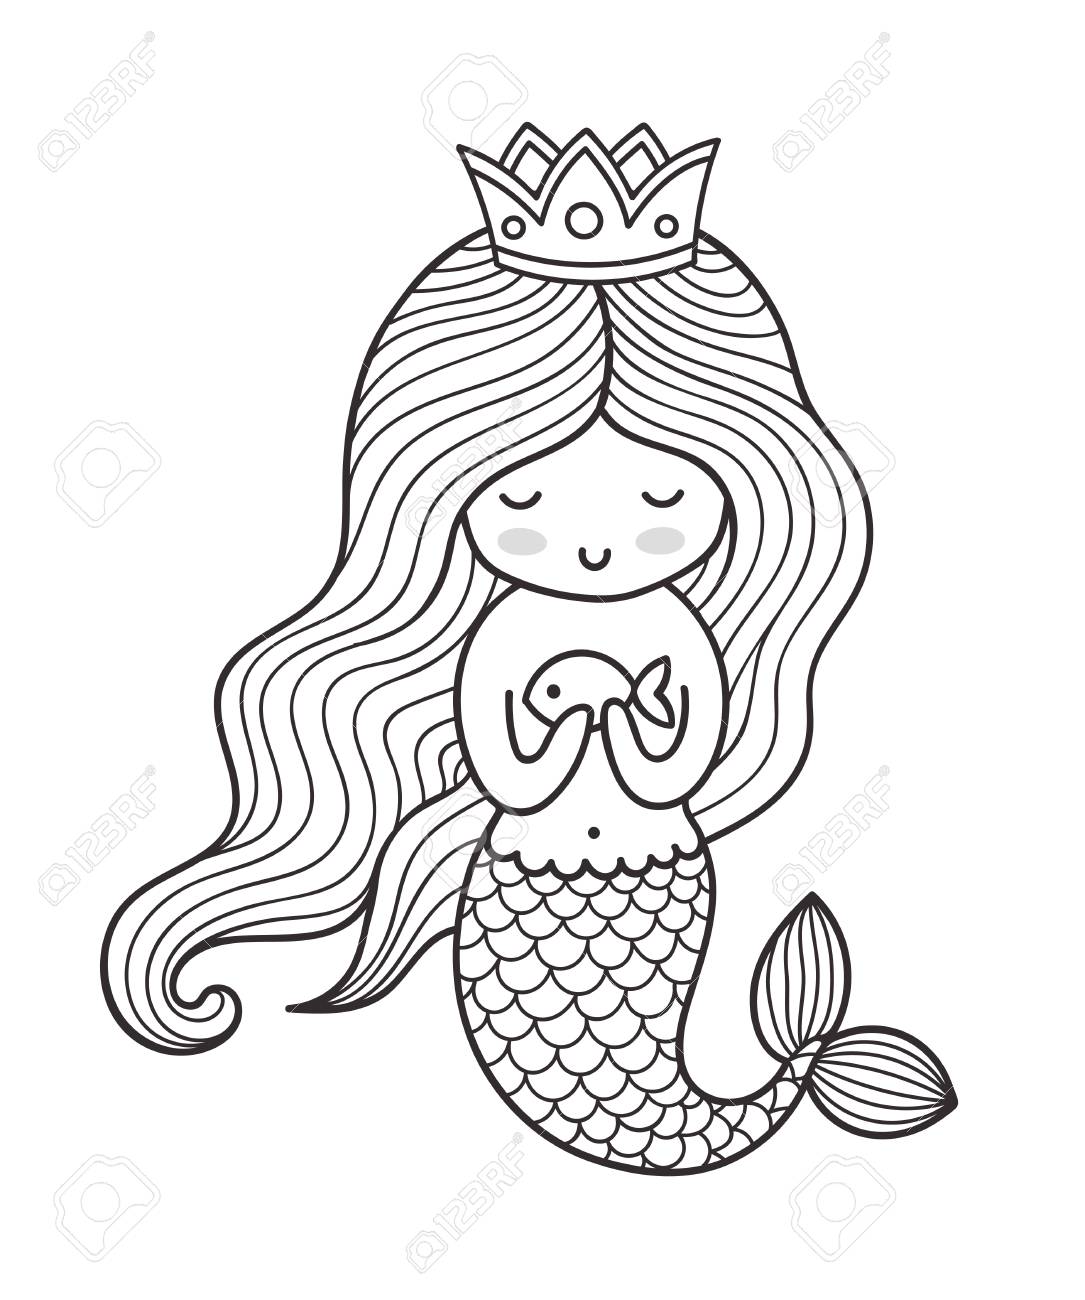 Mermaid with long curly hair and crown. Vector outline illustration...